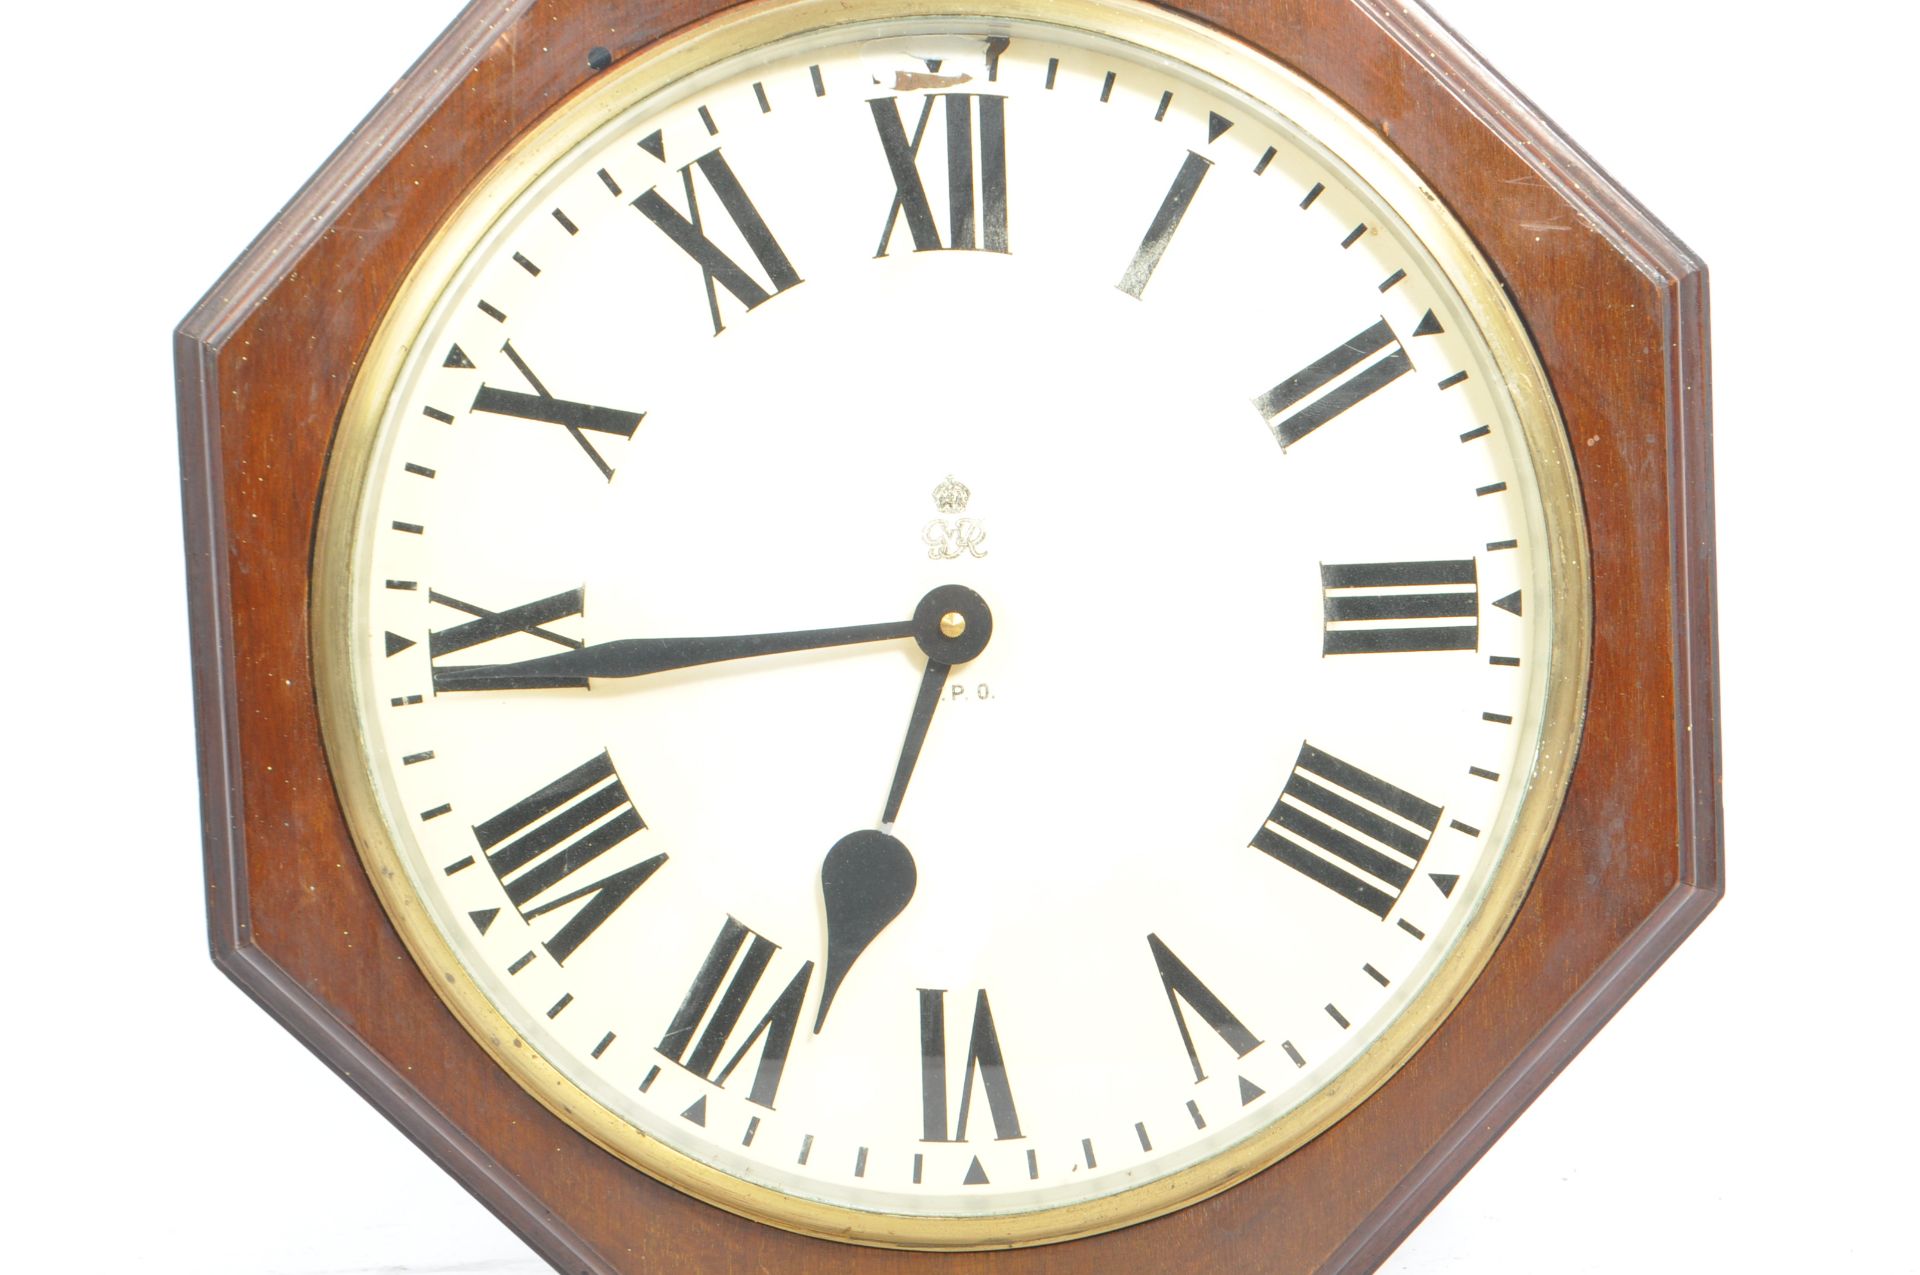 EARLY 20TH CENTURY POST OFFICE GEORGE VI CLOCK - Image 6 of 6